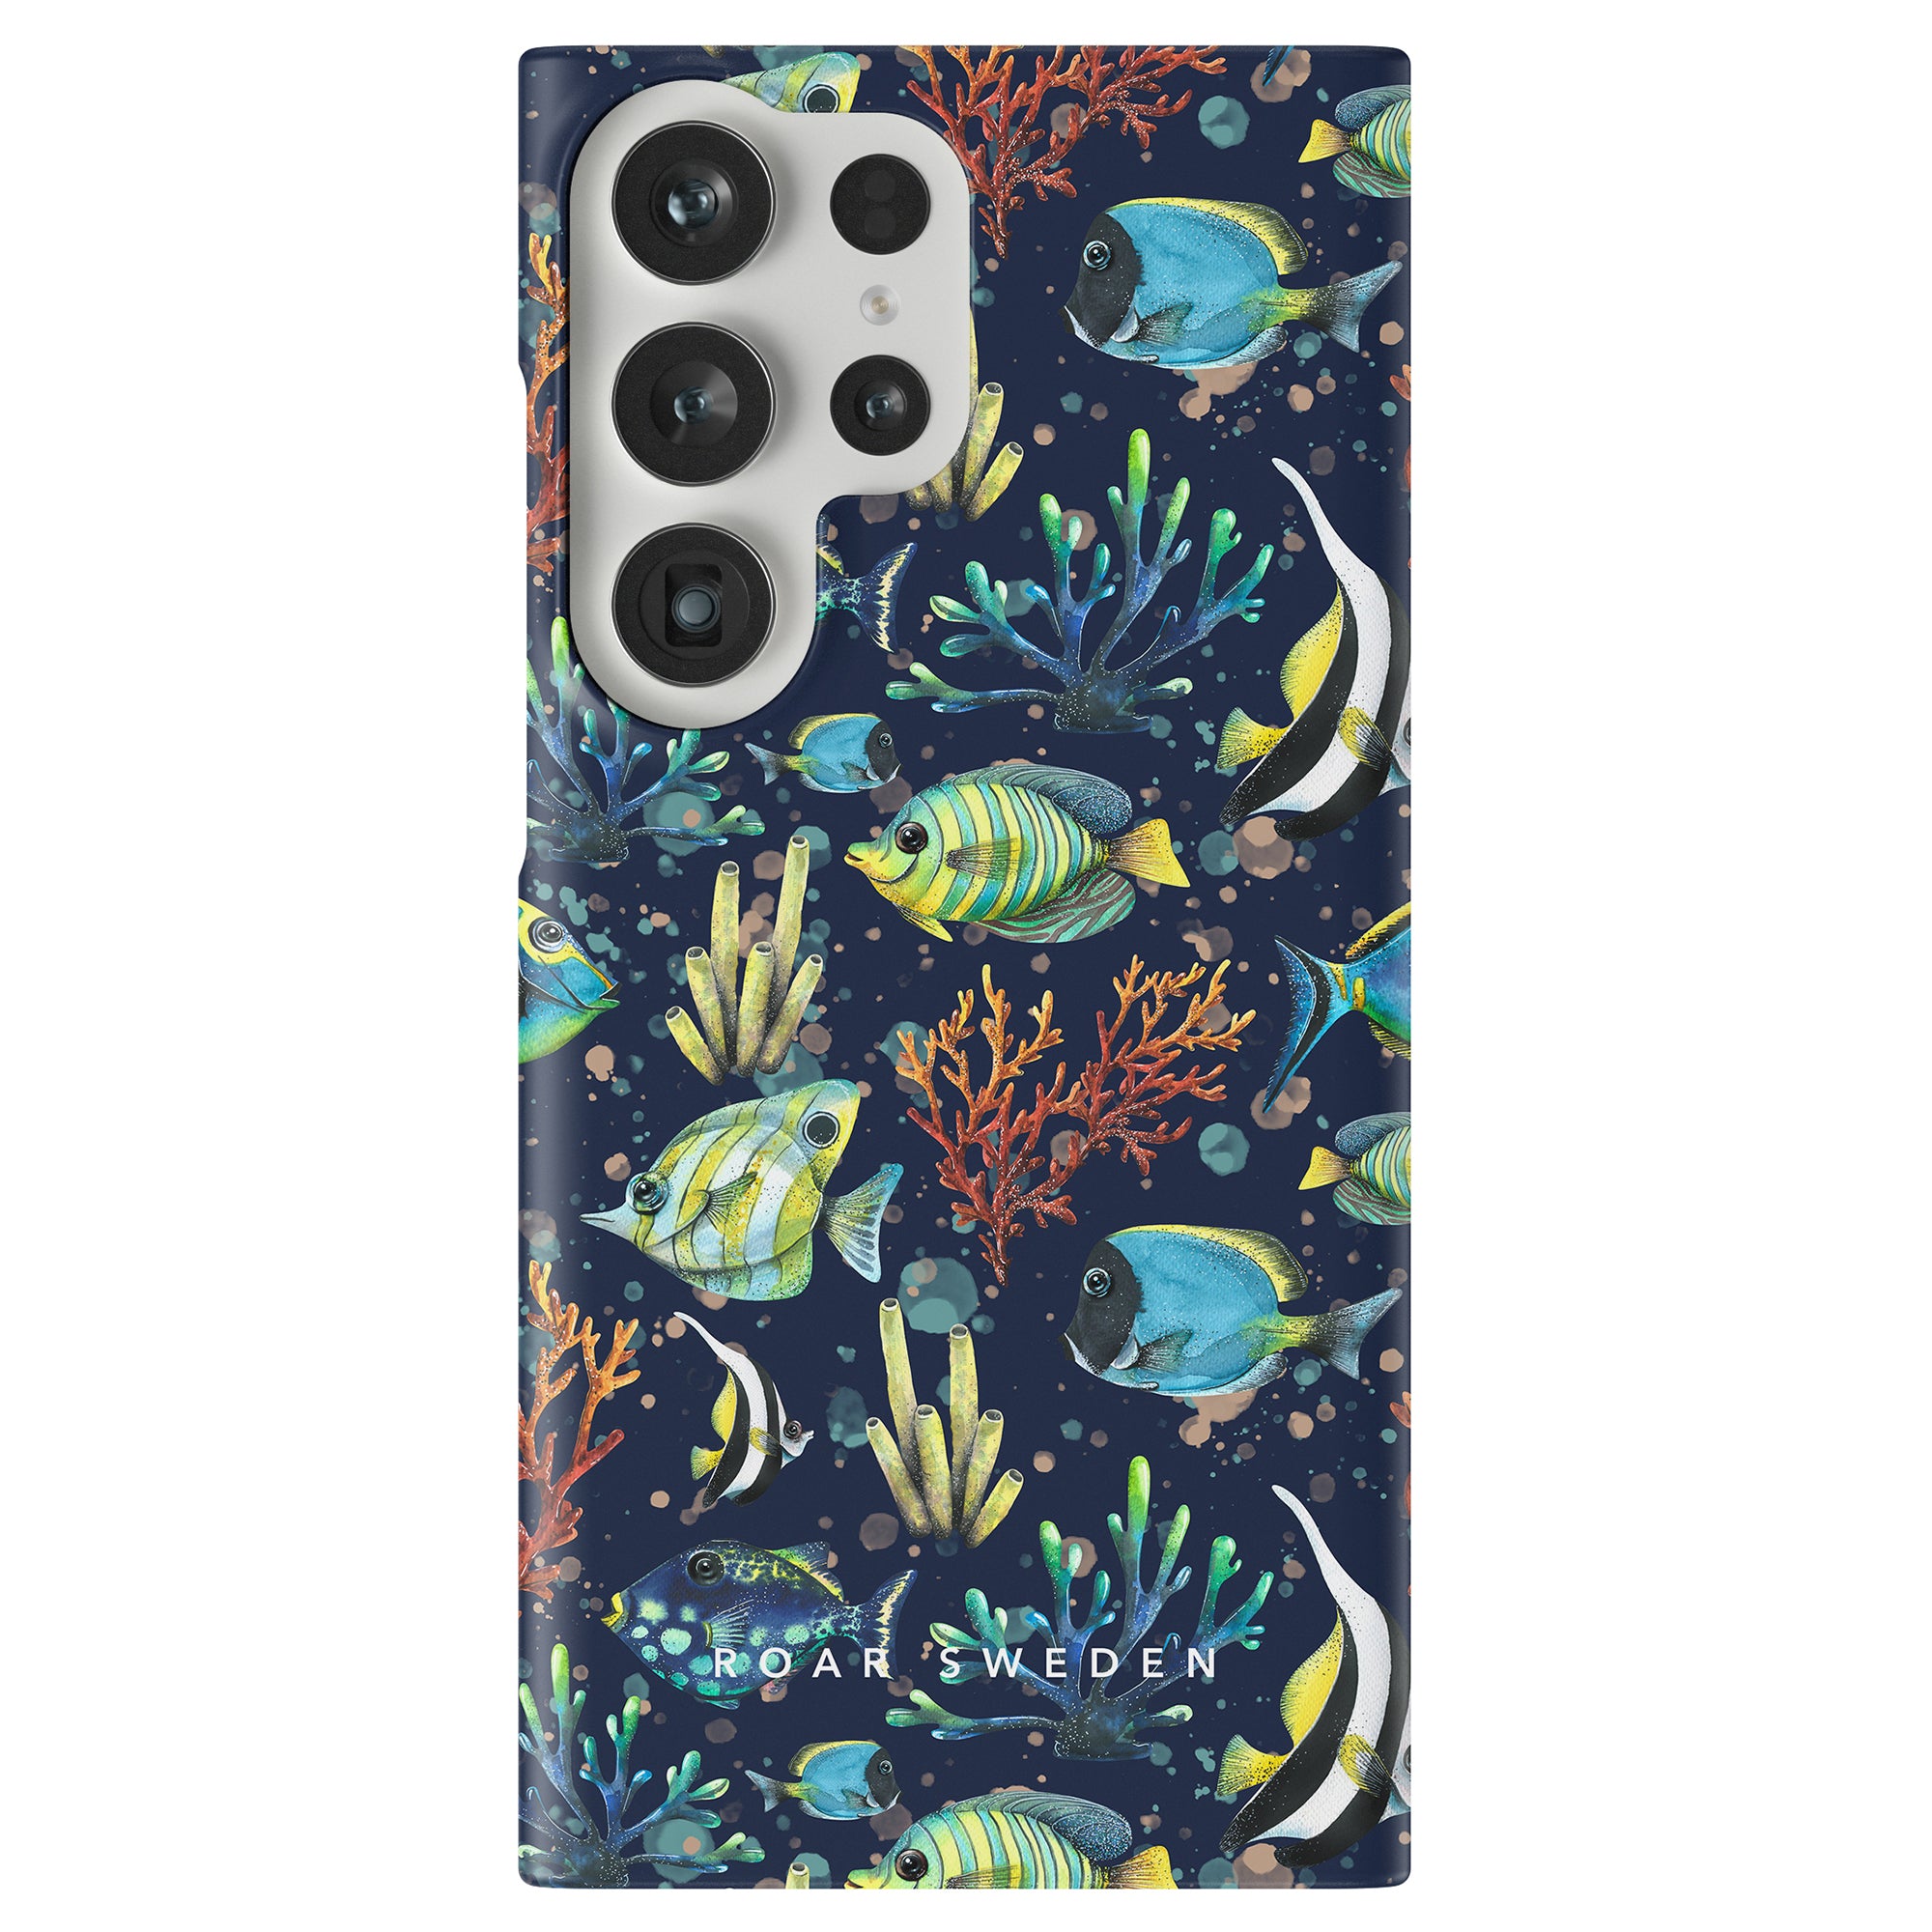 A Tropical Fish - Slim case with a tropical fish pattern.